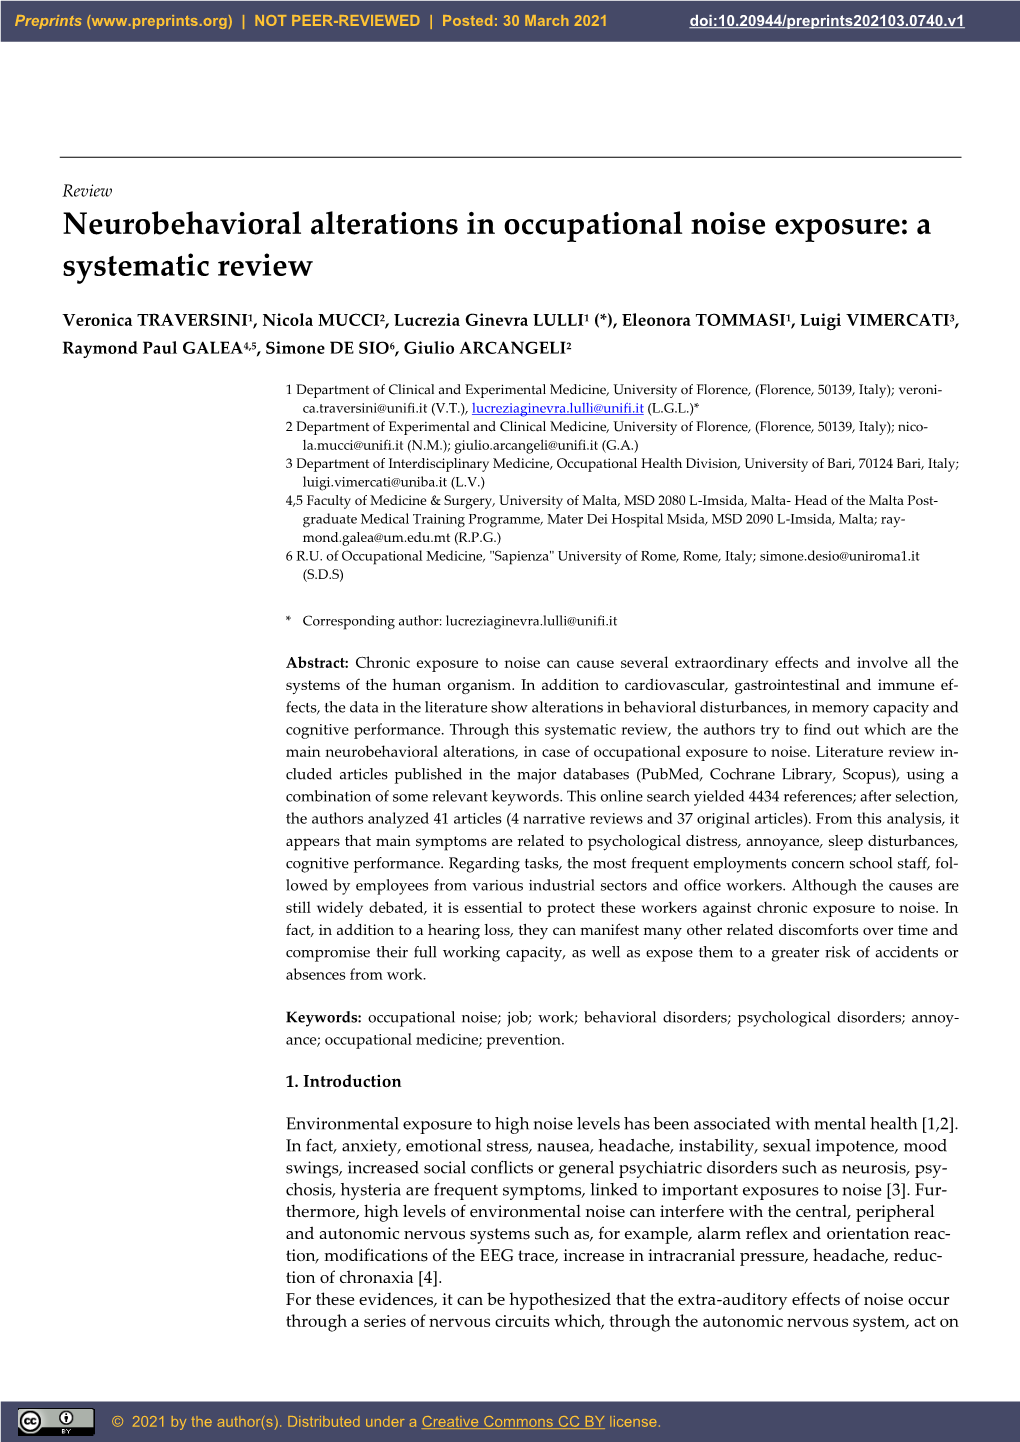 Neurobehavioral Alterations in Occupational Noise Exposure: a Systematic Review